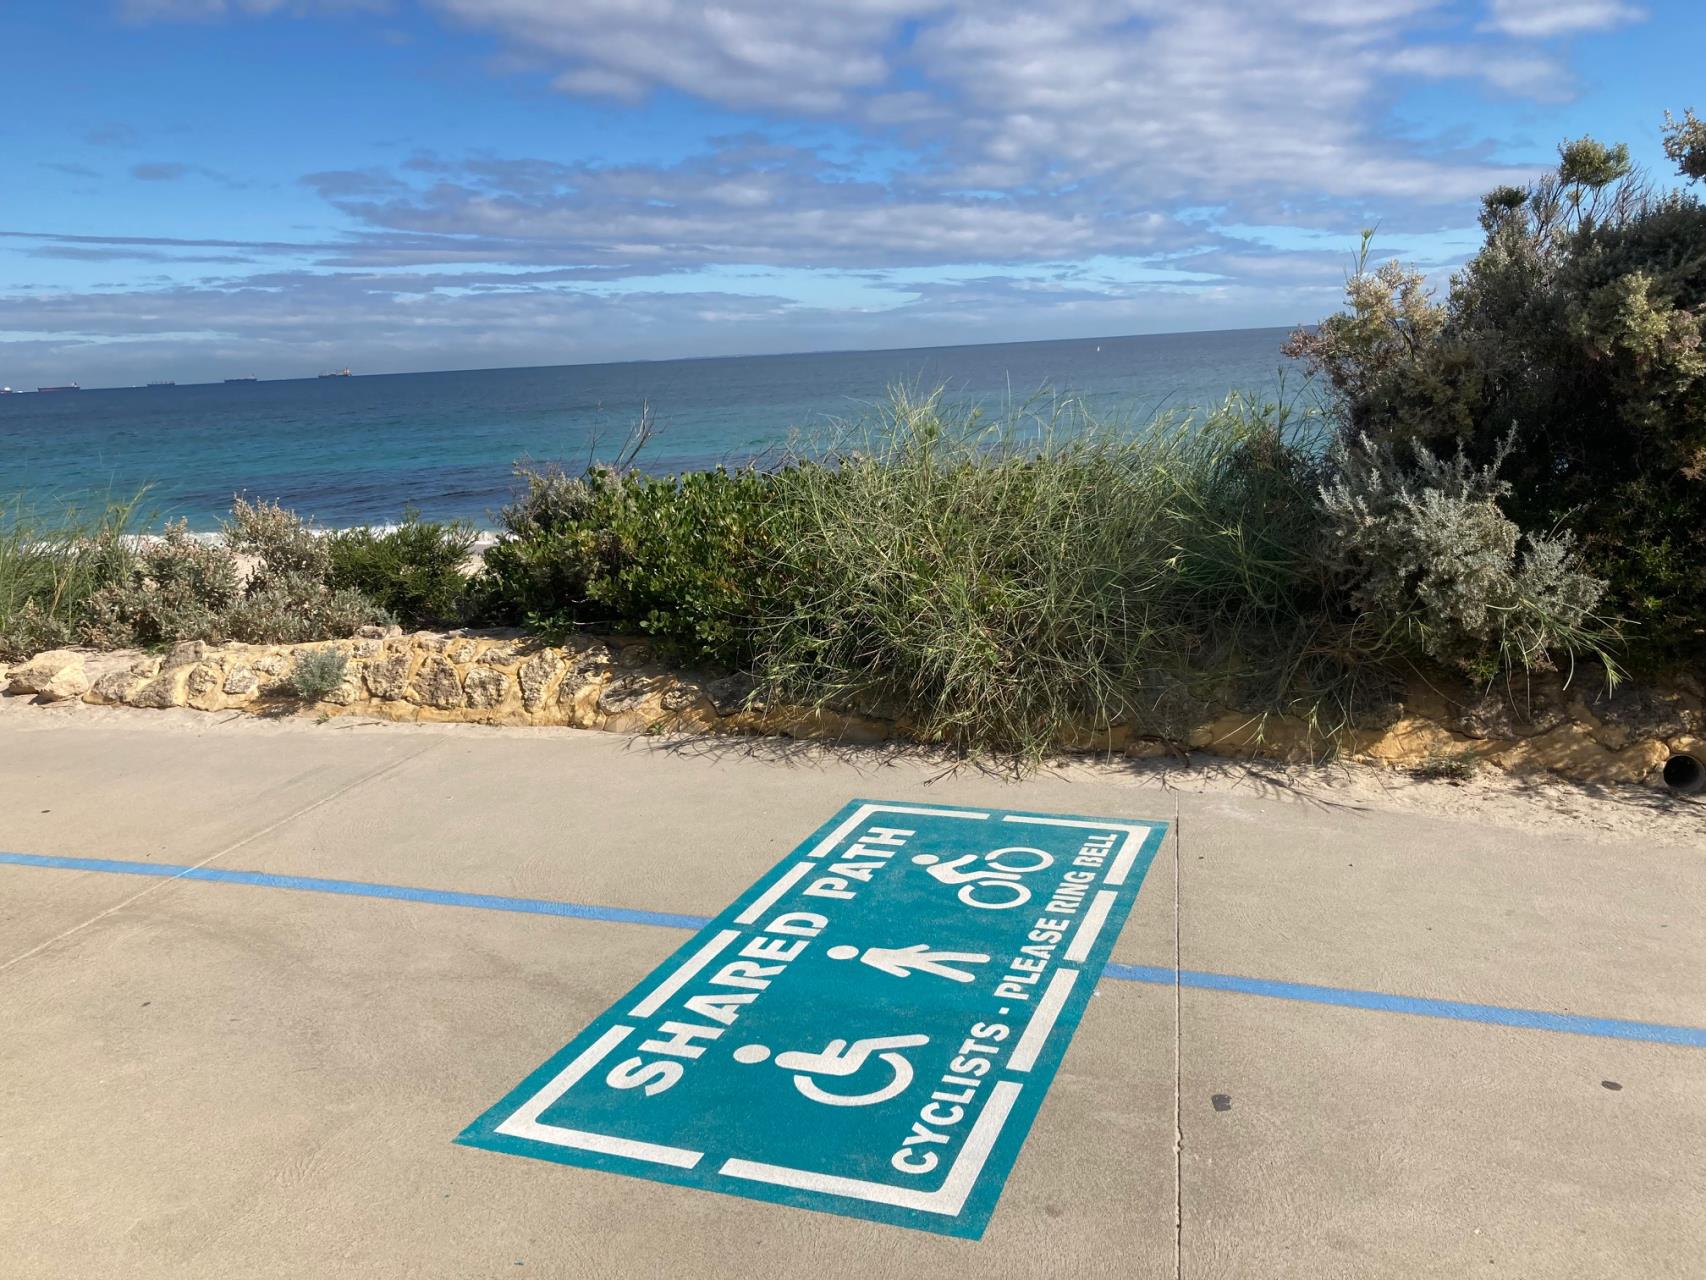 Have you seen our new shared path stencils on the foreshore?